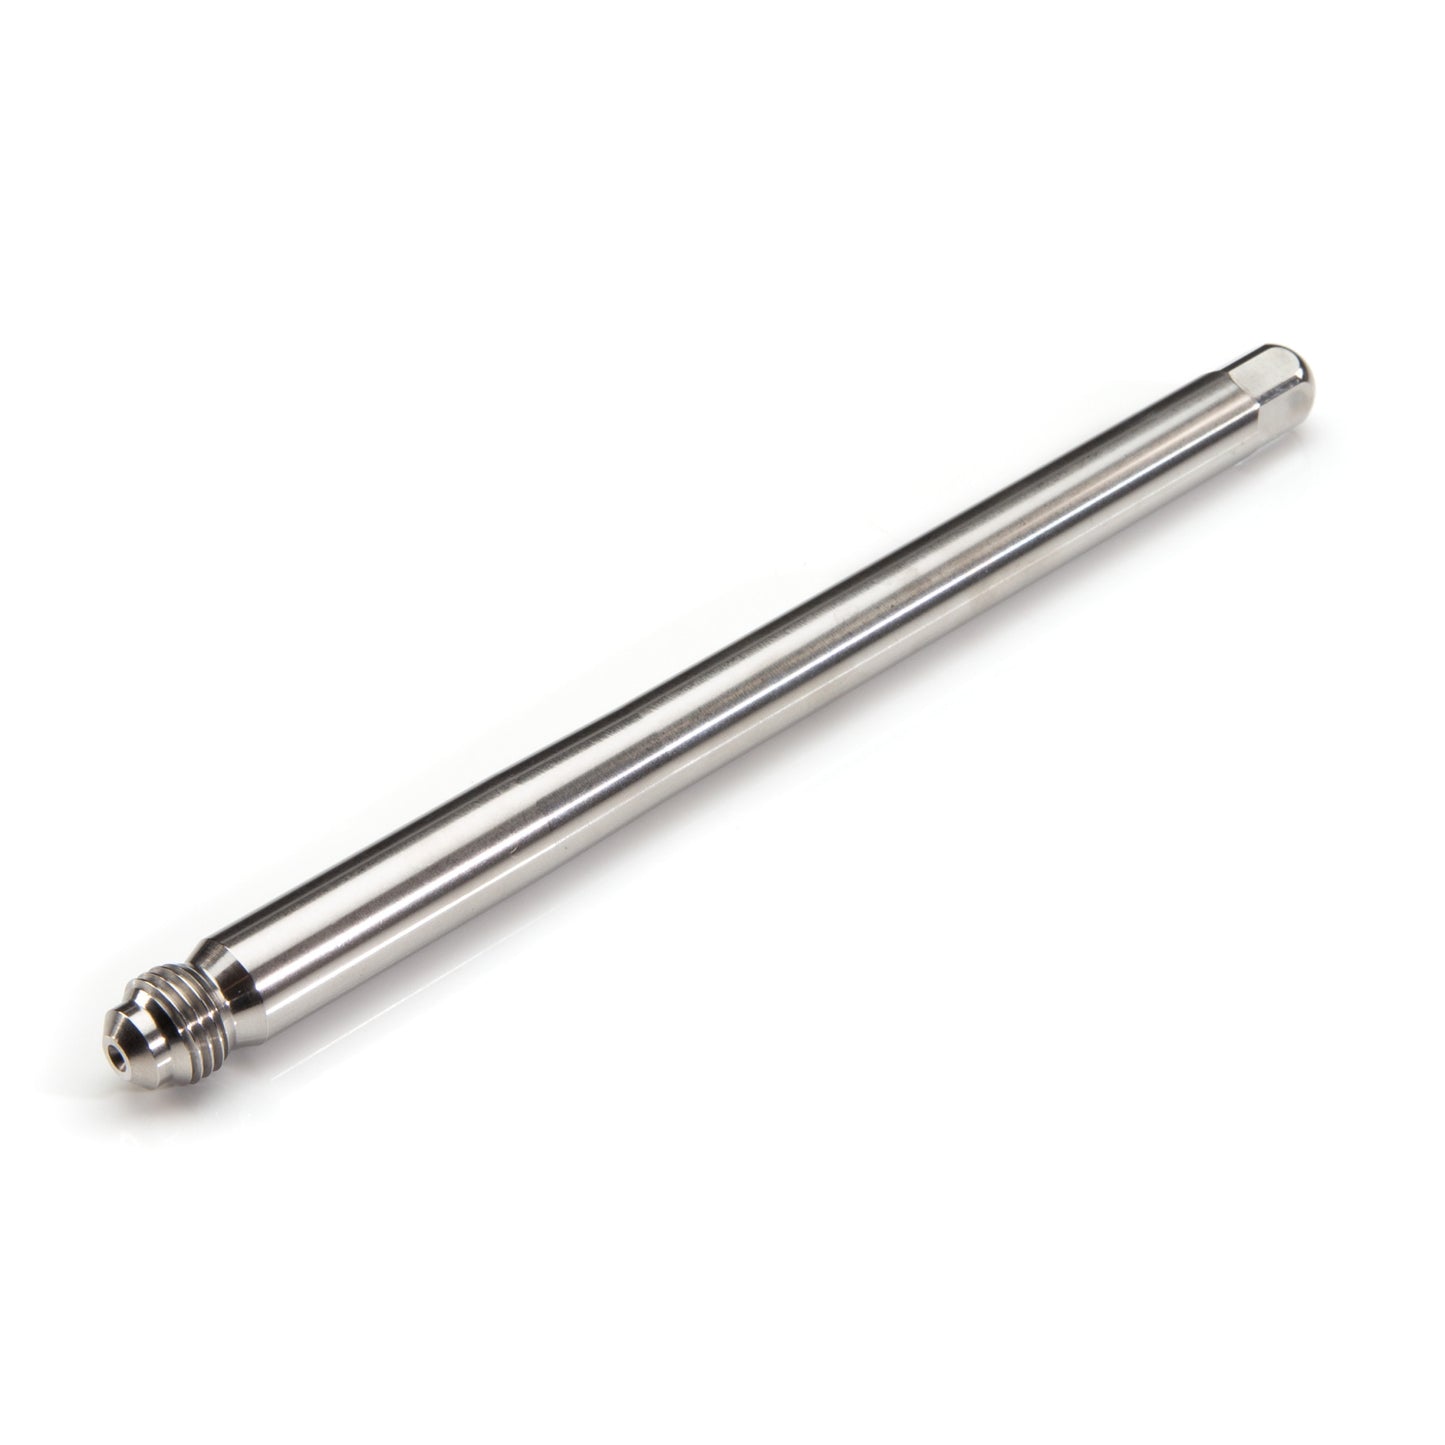 Stainless Steel M14 x 1.5 Hex End Extra-Long Wheel Hanger and Lug Guide Tool